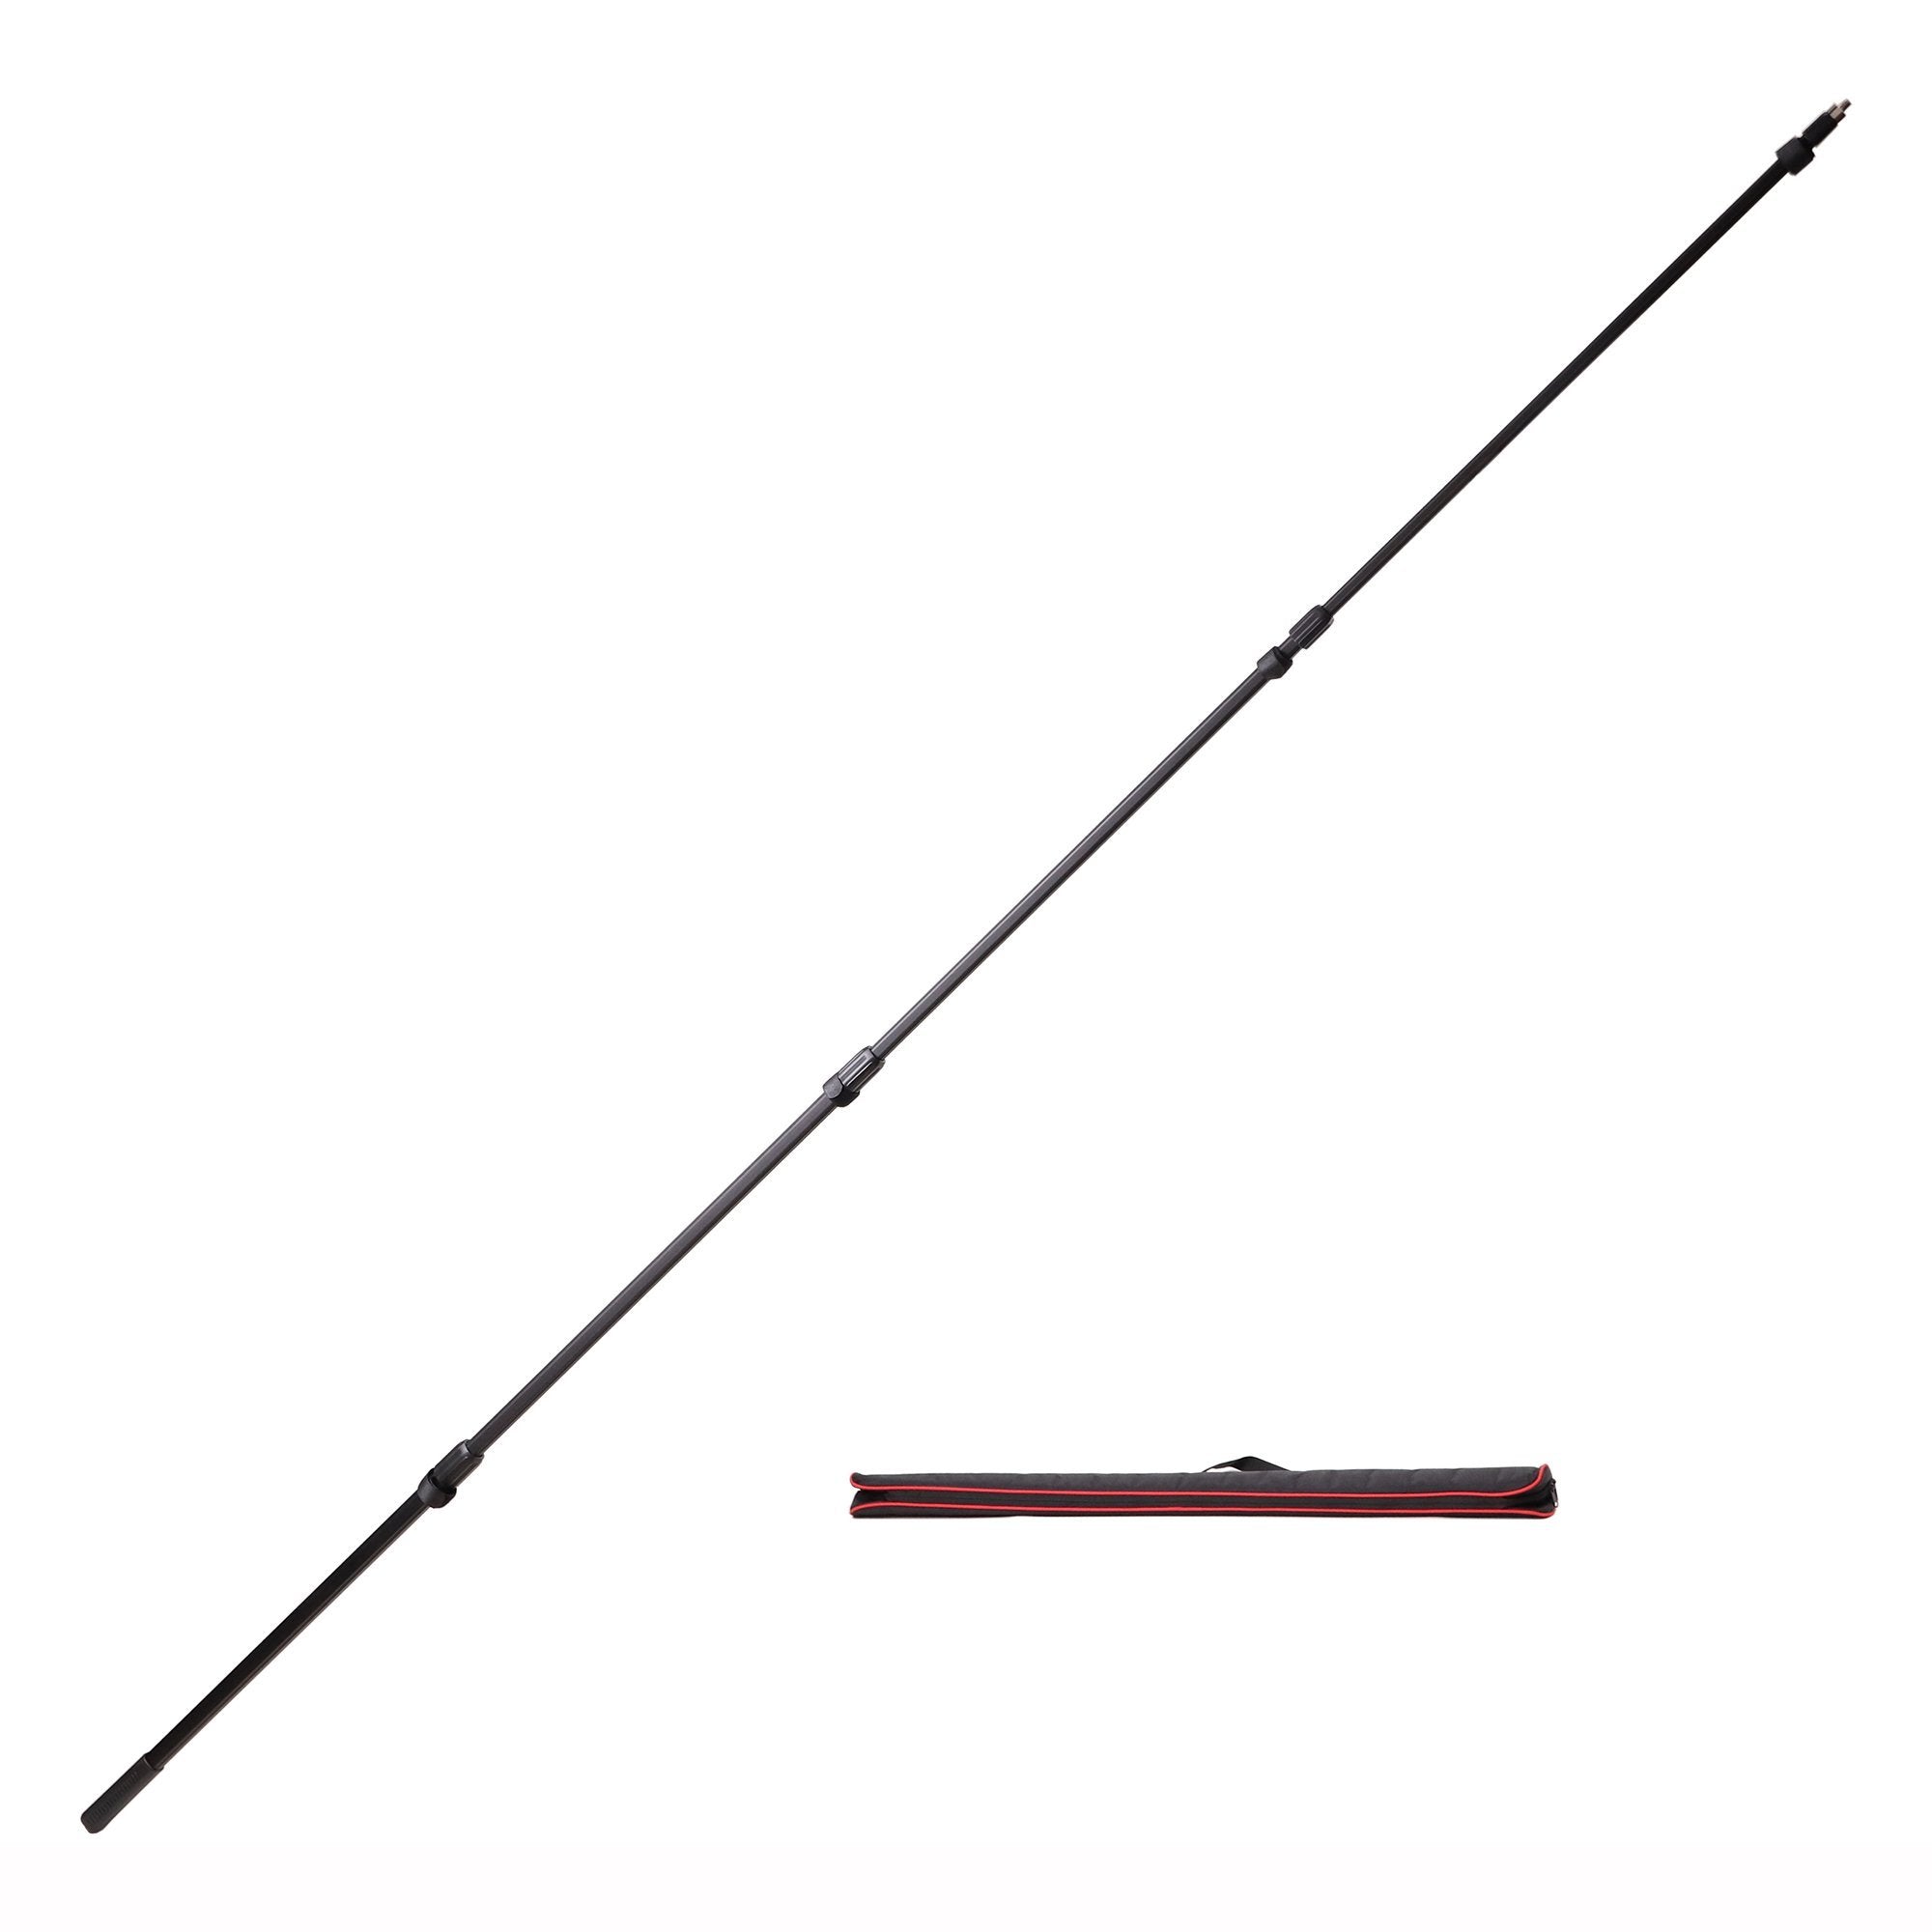 10 Foot Telescopic Boom Pole, 4 Sections with Cable Straps, 3/8 & 5/8 in Threads